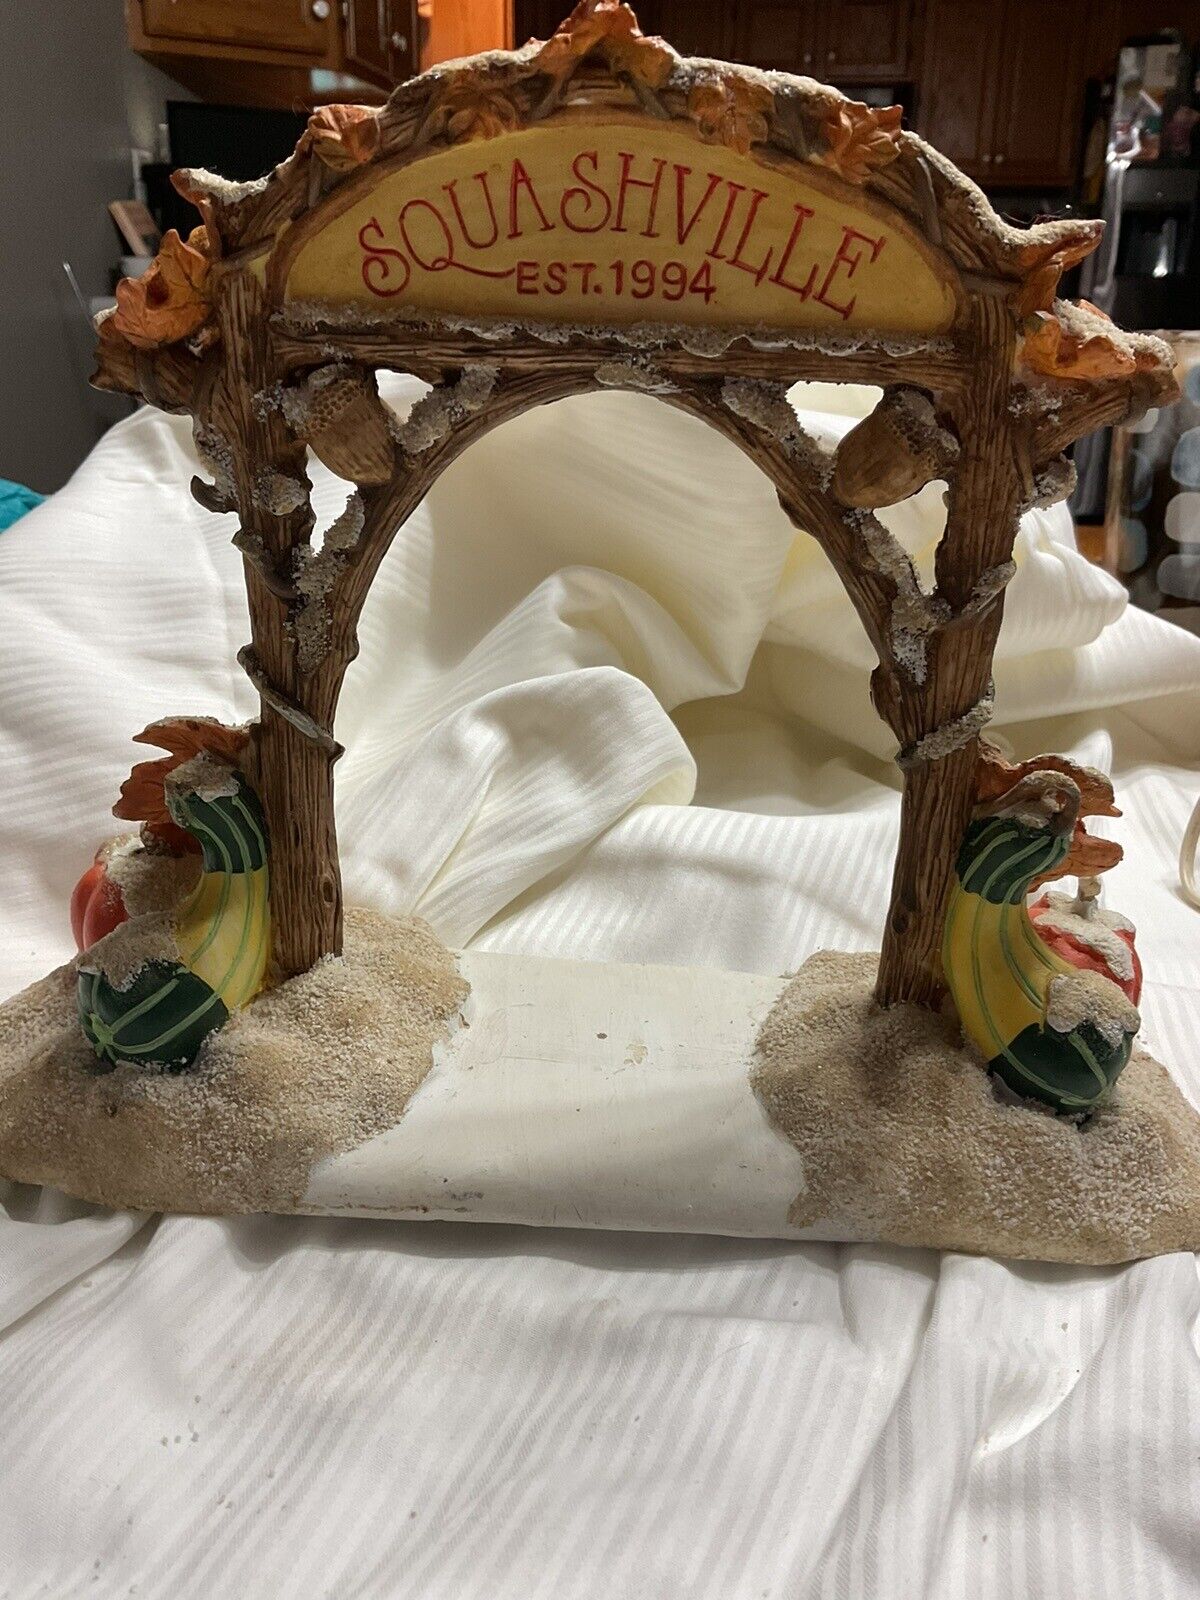 Charming Tails Squashville Entry Arch